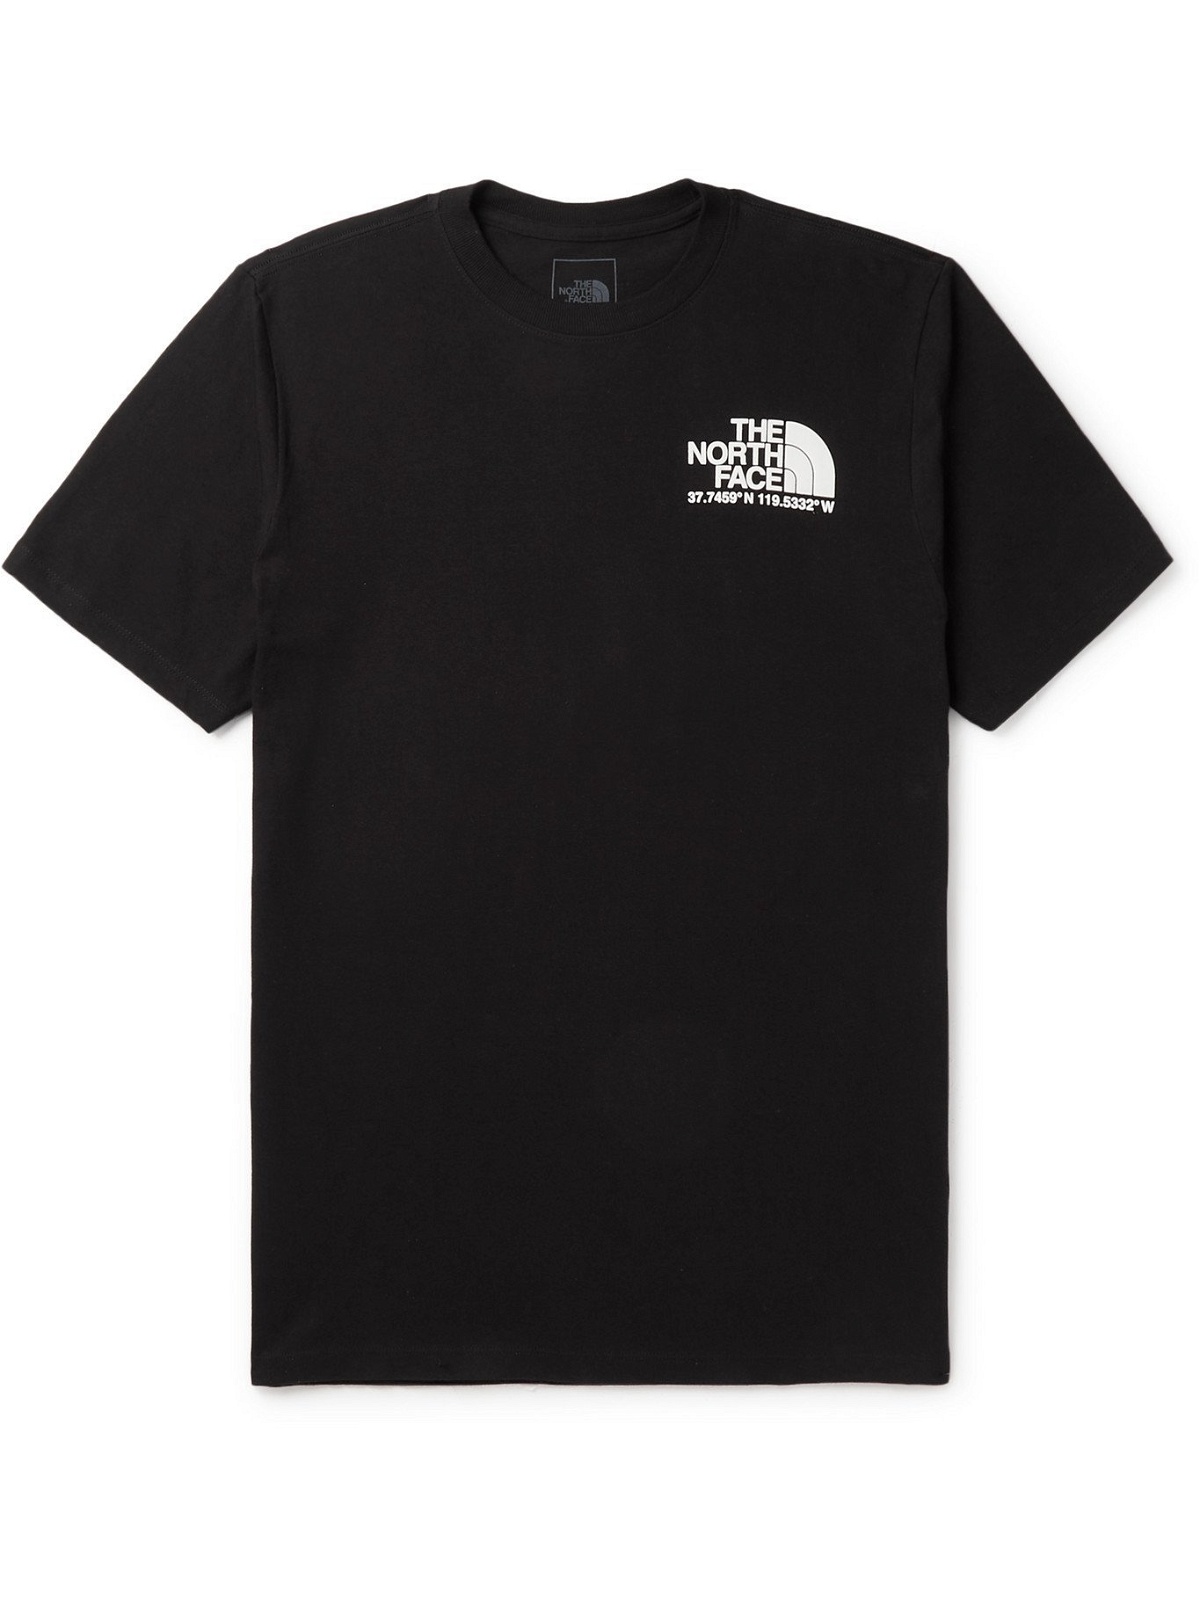 THE NORTH FACE - Logo-Print Cotton-Jersey T-Shirt - Black - S The North ...